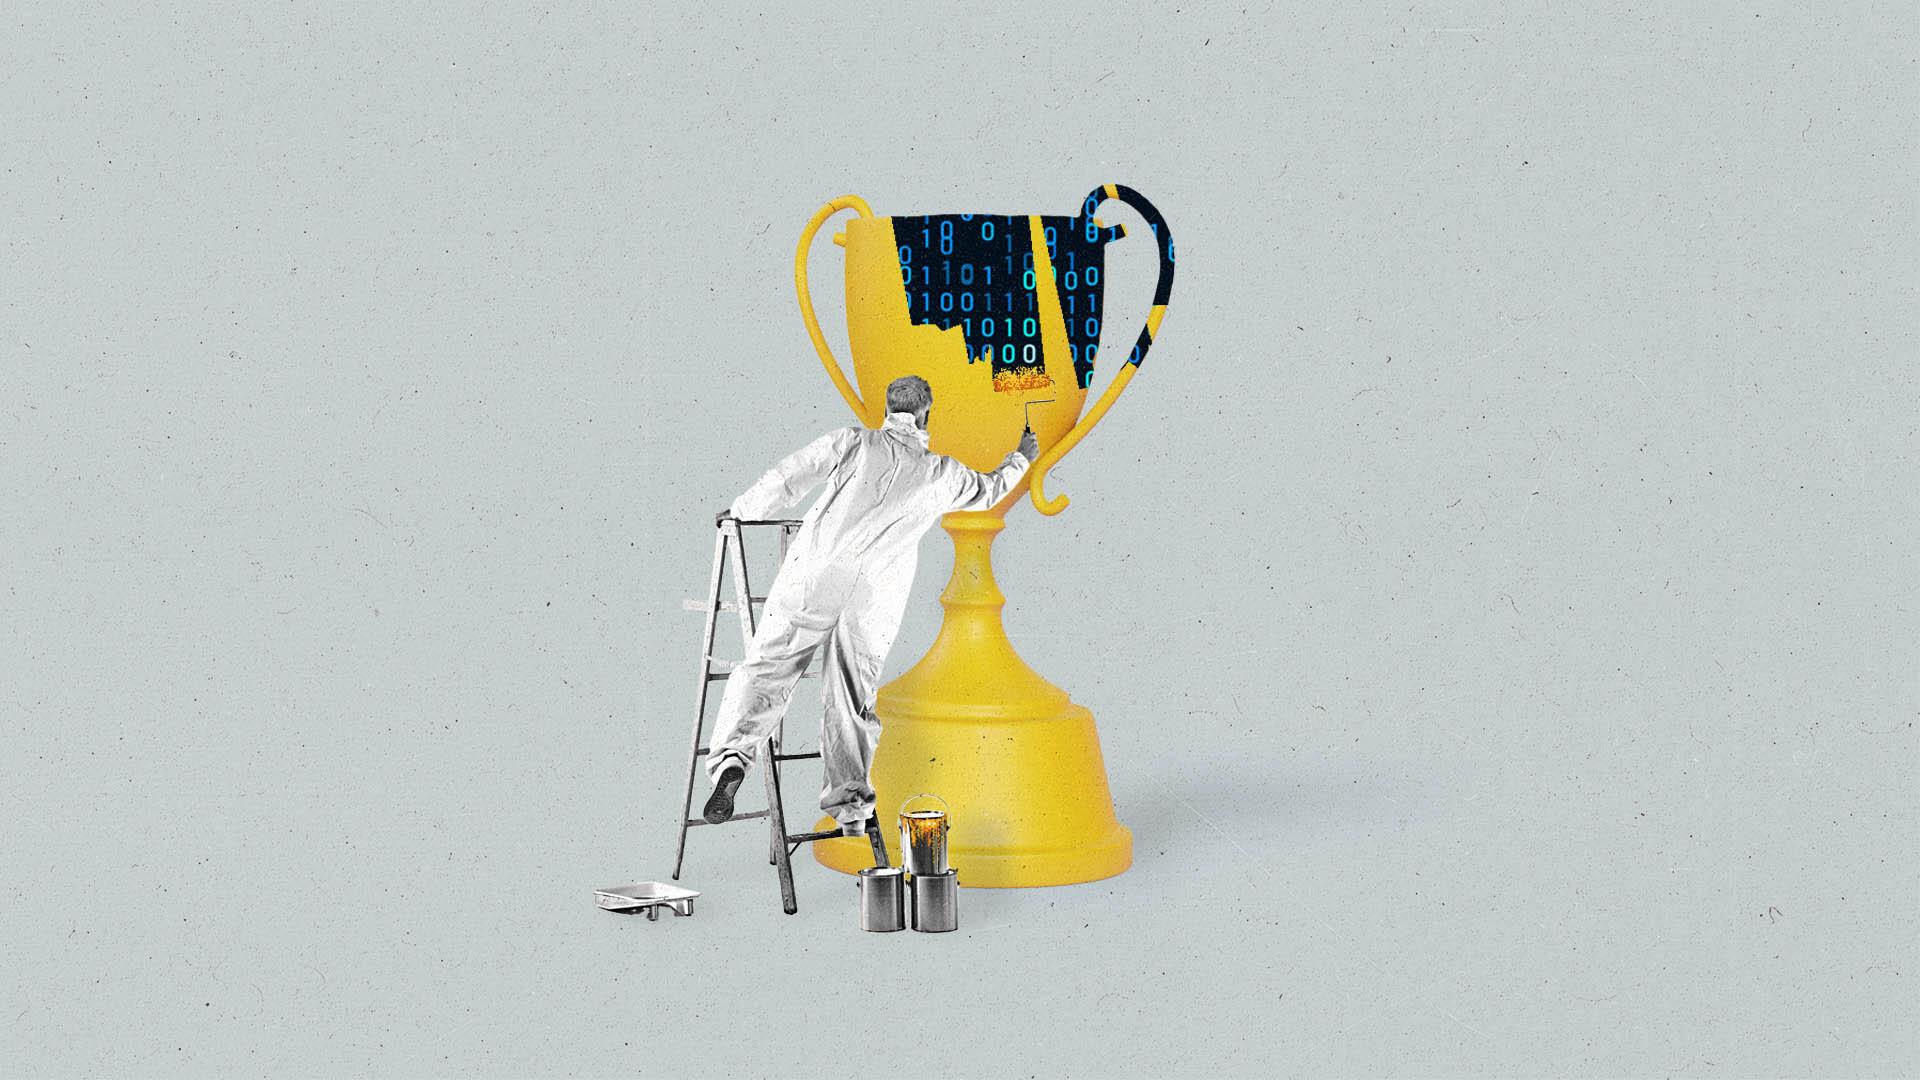 A trophy showing data zeros and ones is painted gold by a man on a ladder.